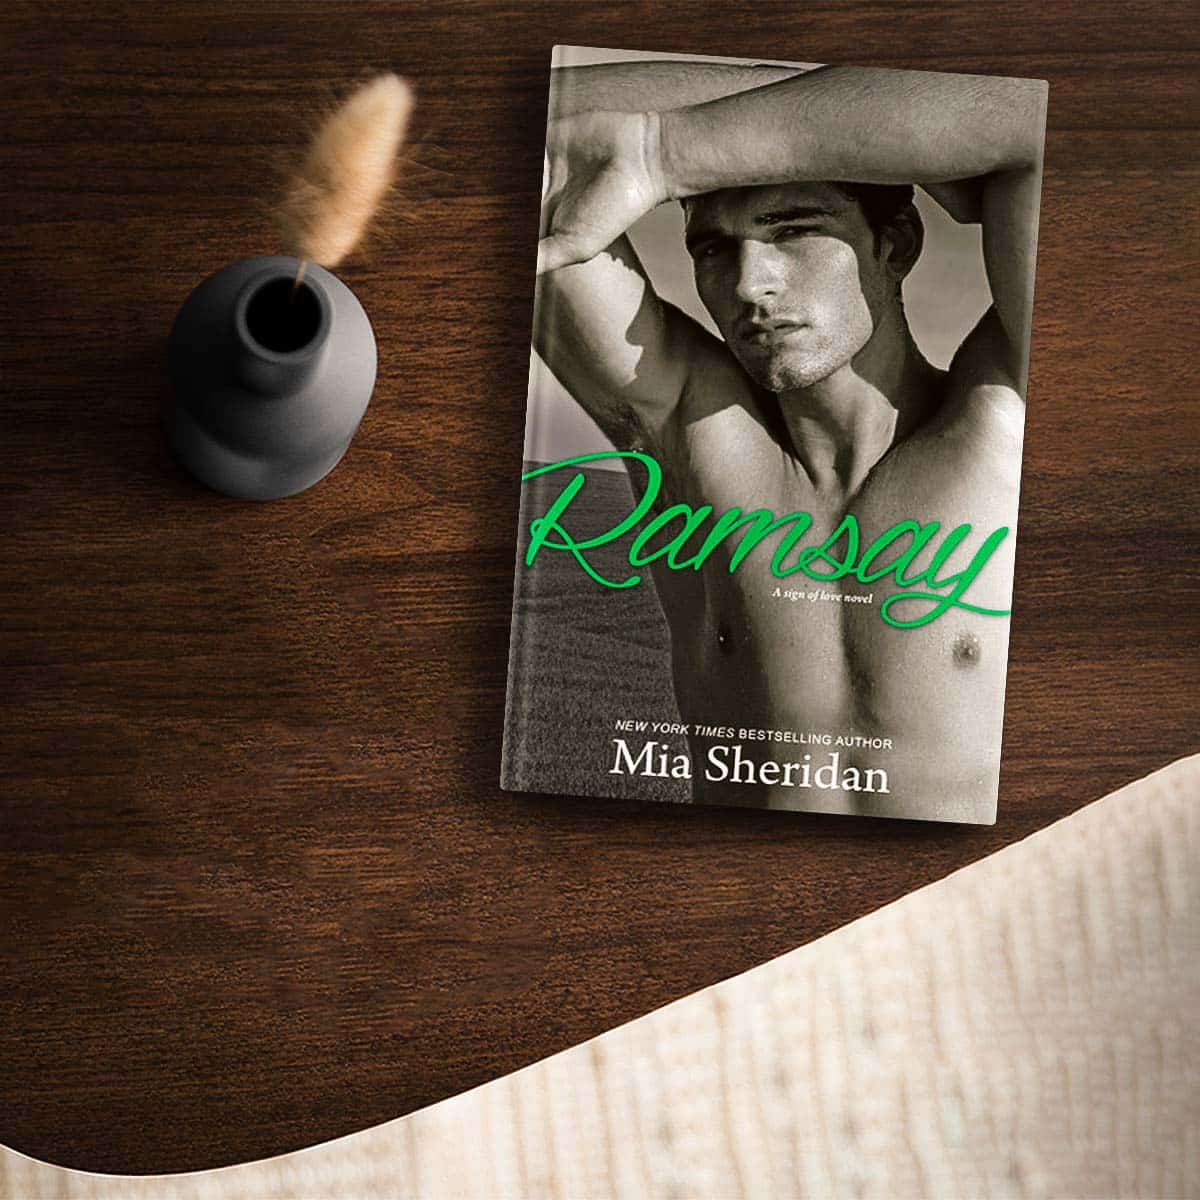 Full of twists and turns, Ramsay by Mia Sheridan is a tale of unrequited love, tremendous loss, bitter revenge, and ultimately, well-earned redemption.